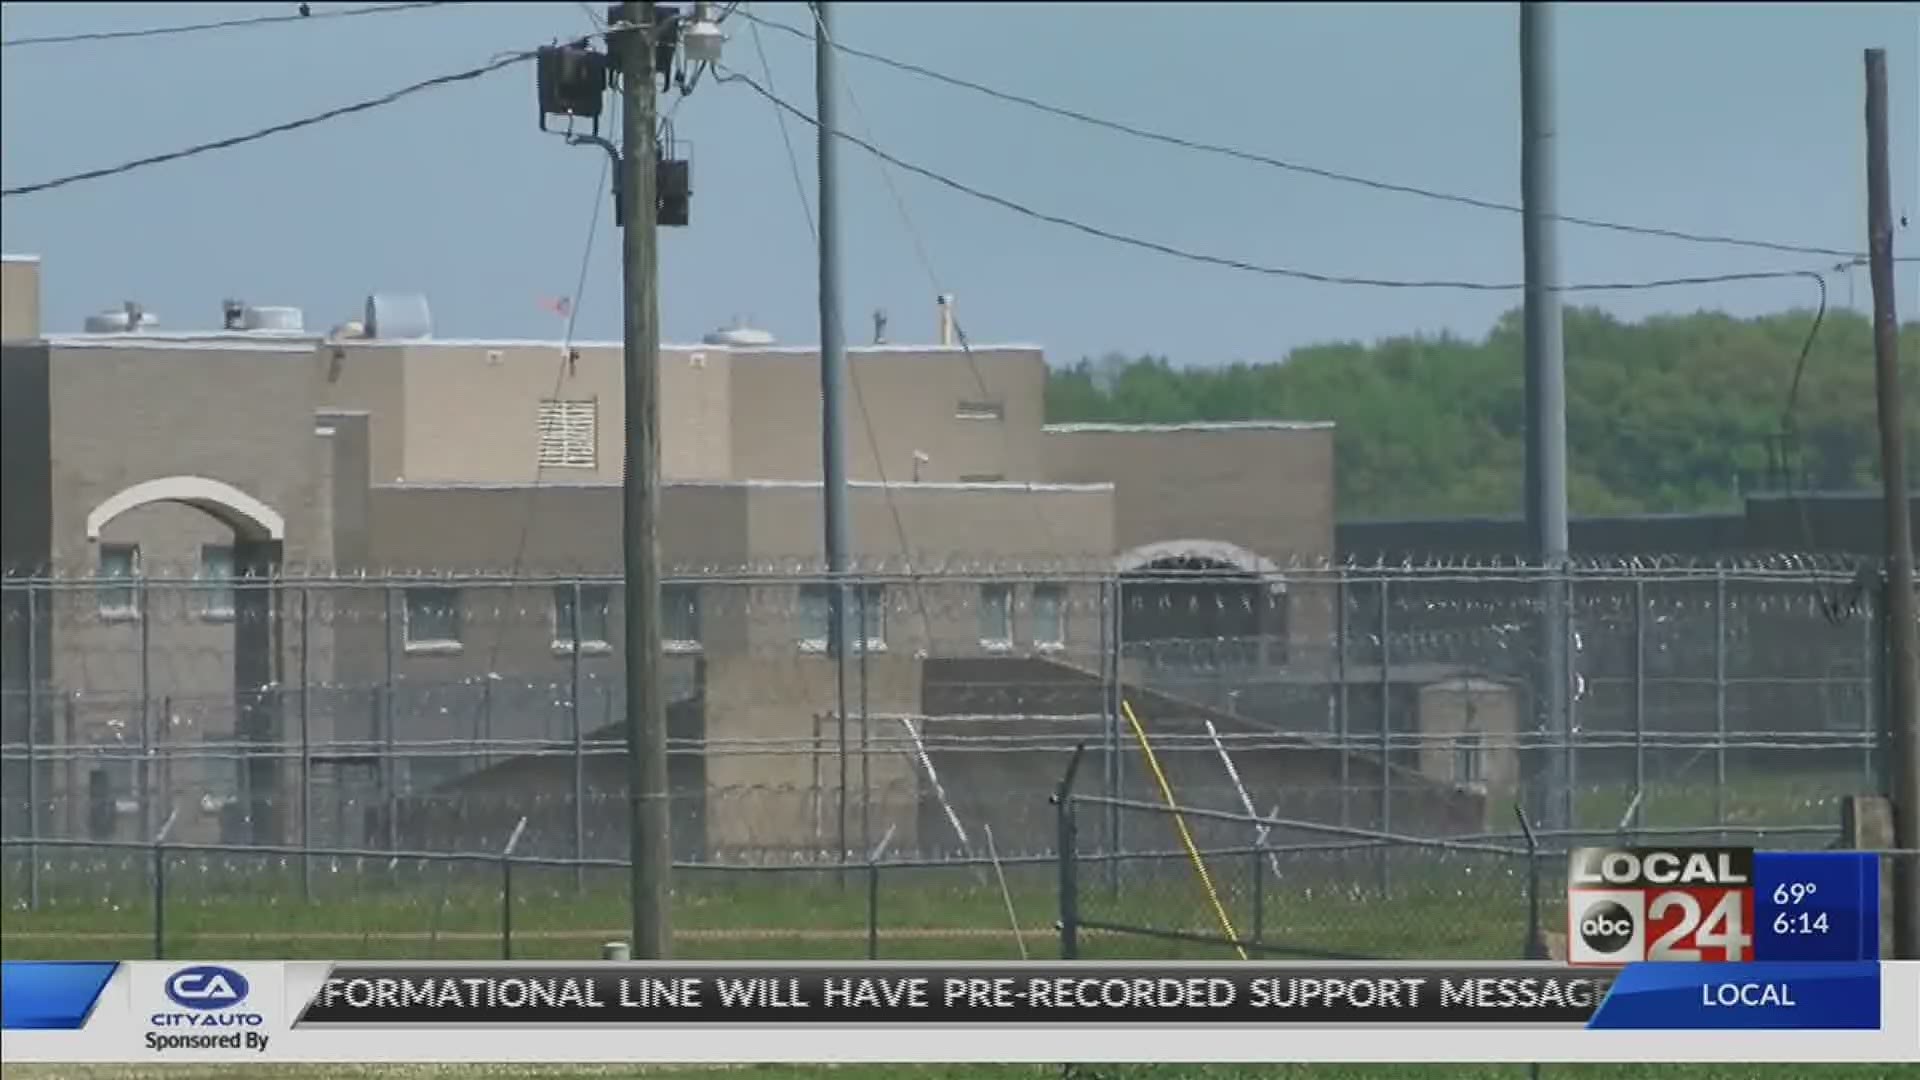 More than 50 inmates and staff tested positive for COVID-19 at Forrest City Correctional Complex